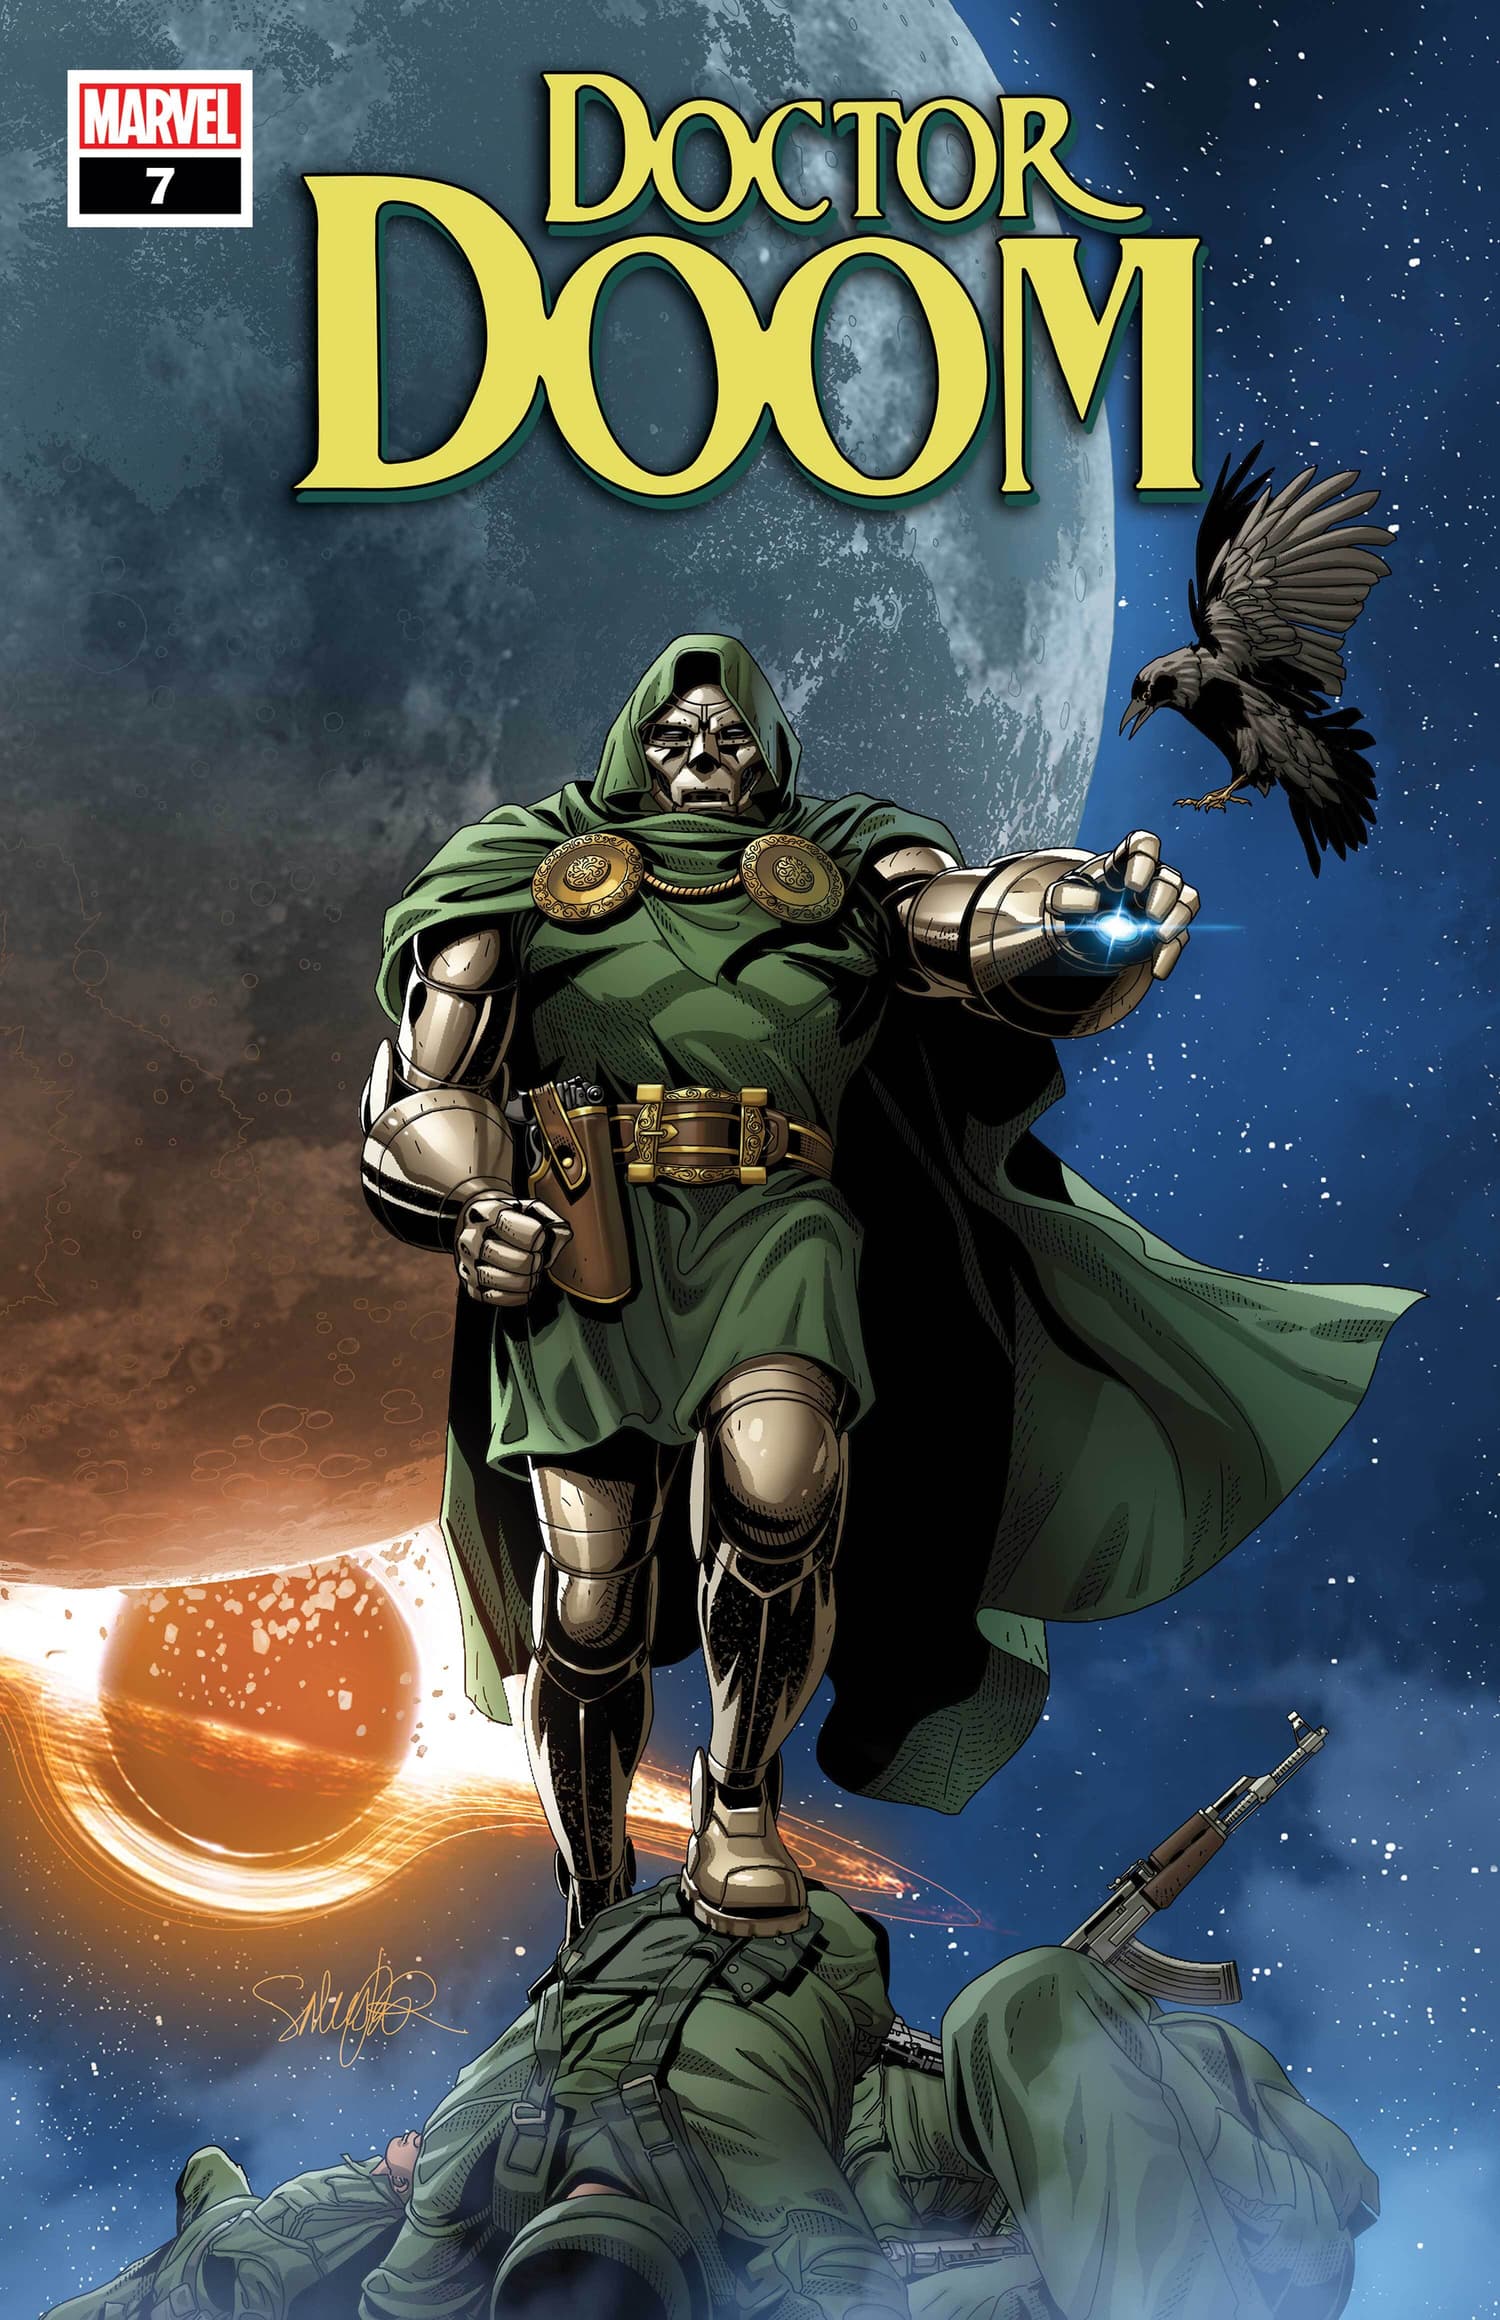 DOCTOR DOOM #7 WRITTEN BY CHRISTOPHER CANTWELL, ART AND COVER BY SALVADOR LARROCA